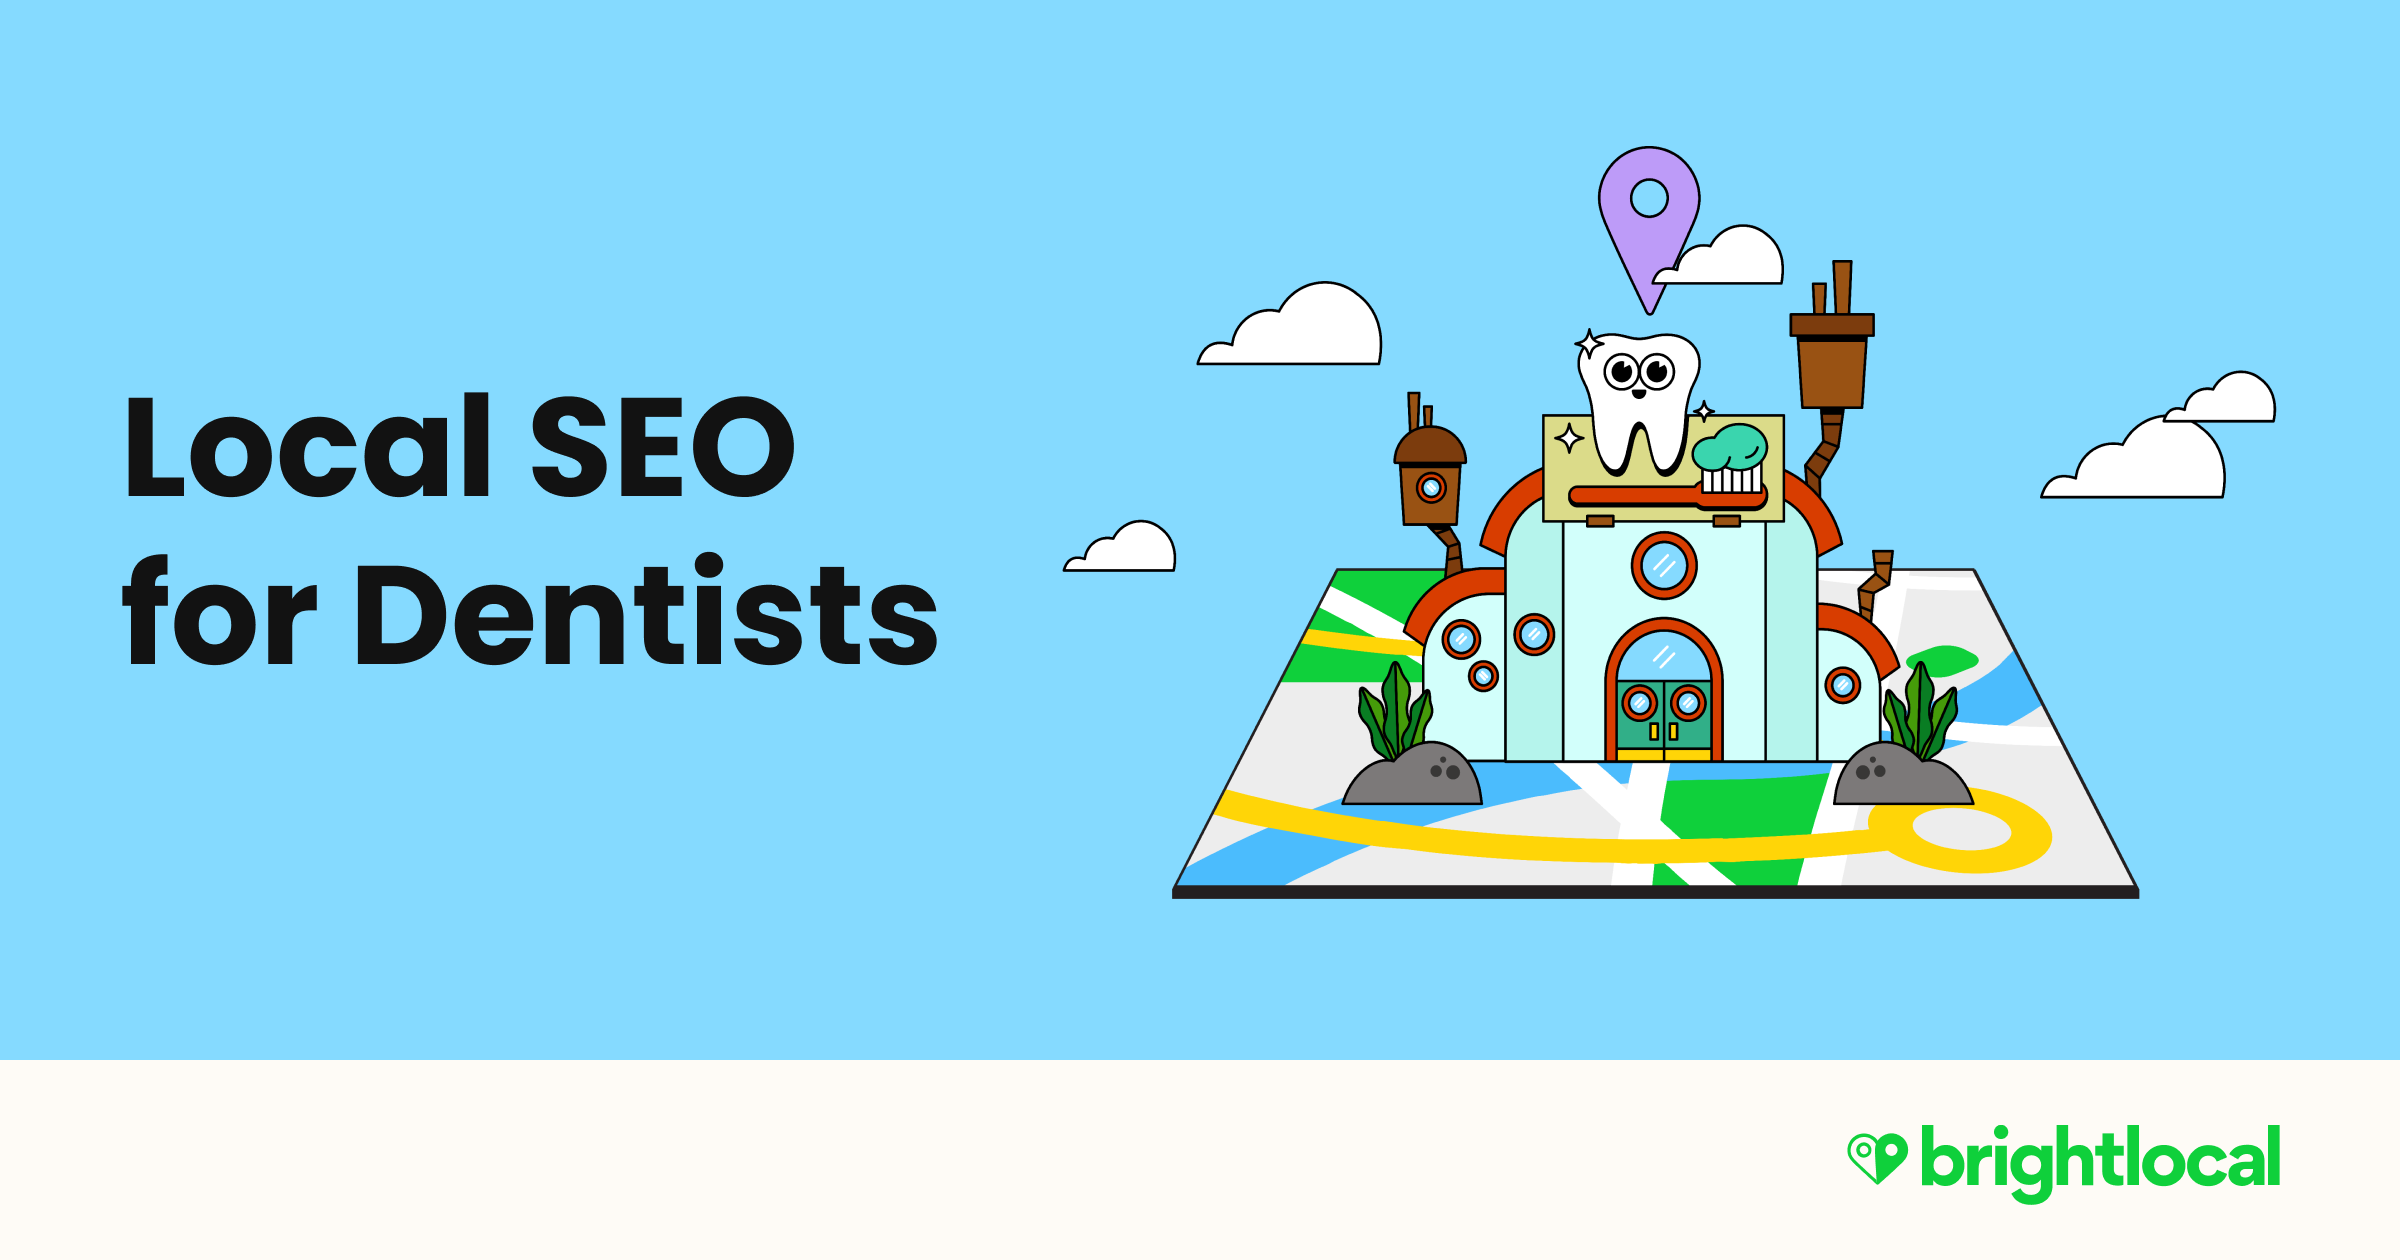 Local-SEO-for-Dentists-Social.png